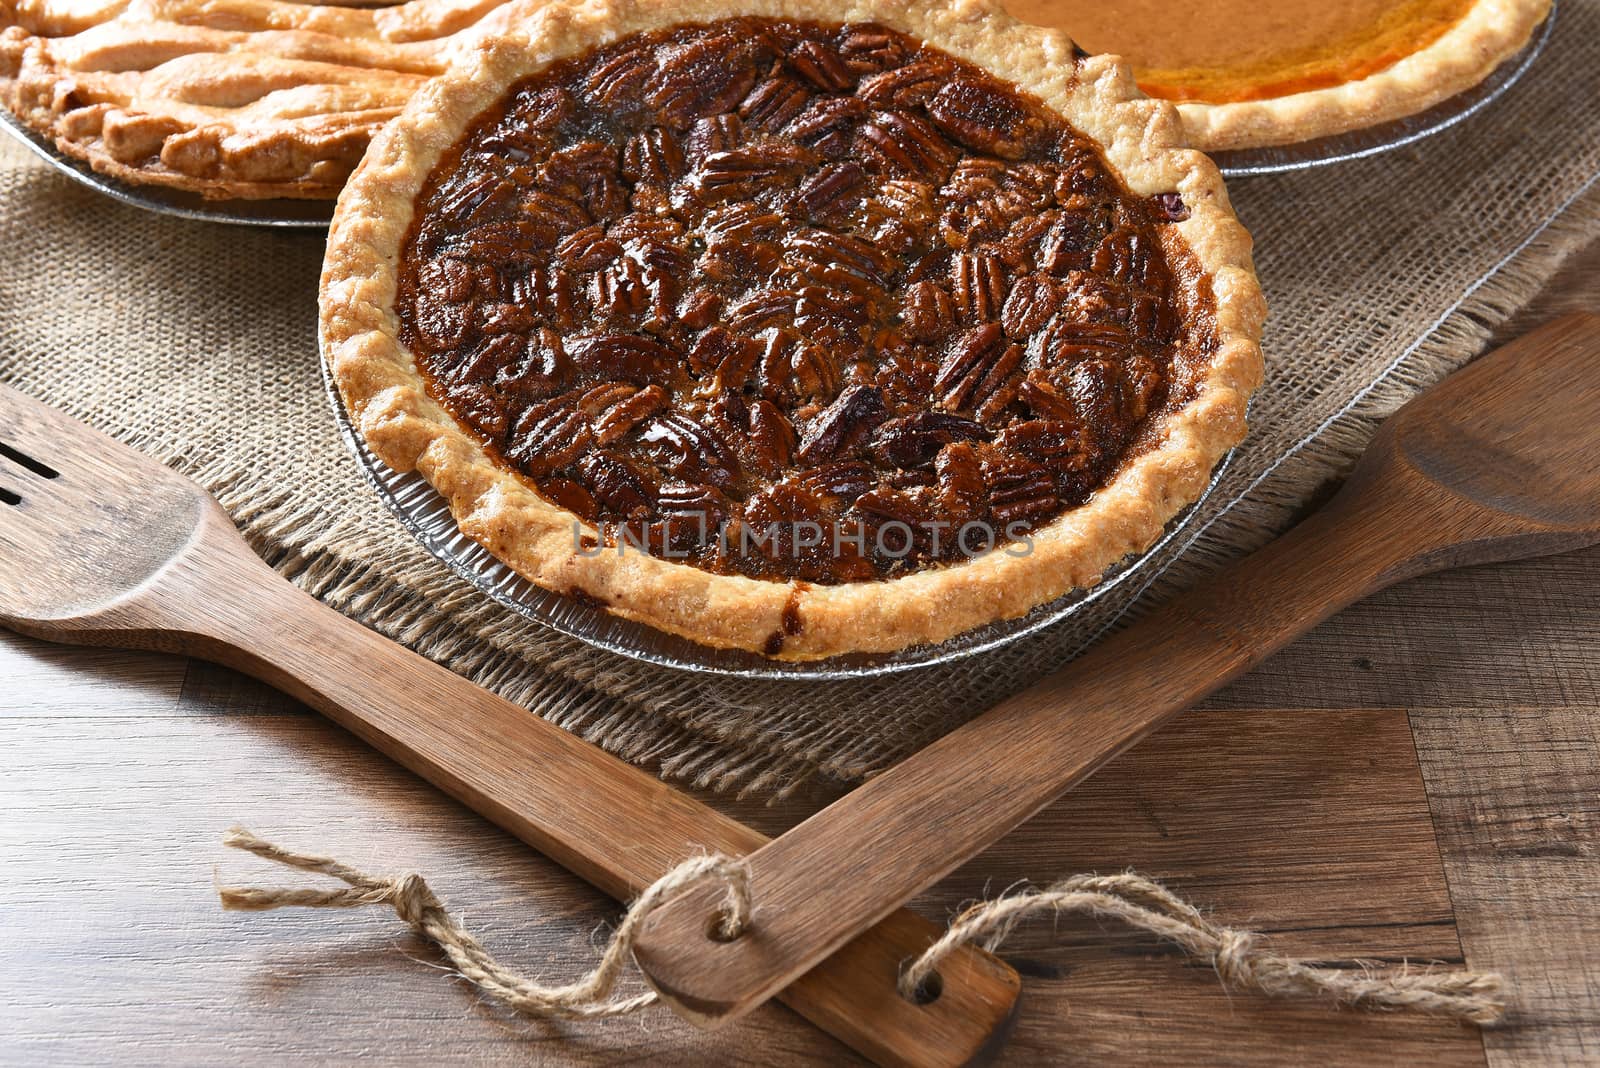 Closeup of a fresh baked Pecan pie with wood utensils and burlap table cloth. Two additional pies in the background. Thanksgiving concept.